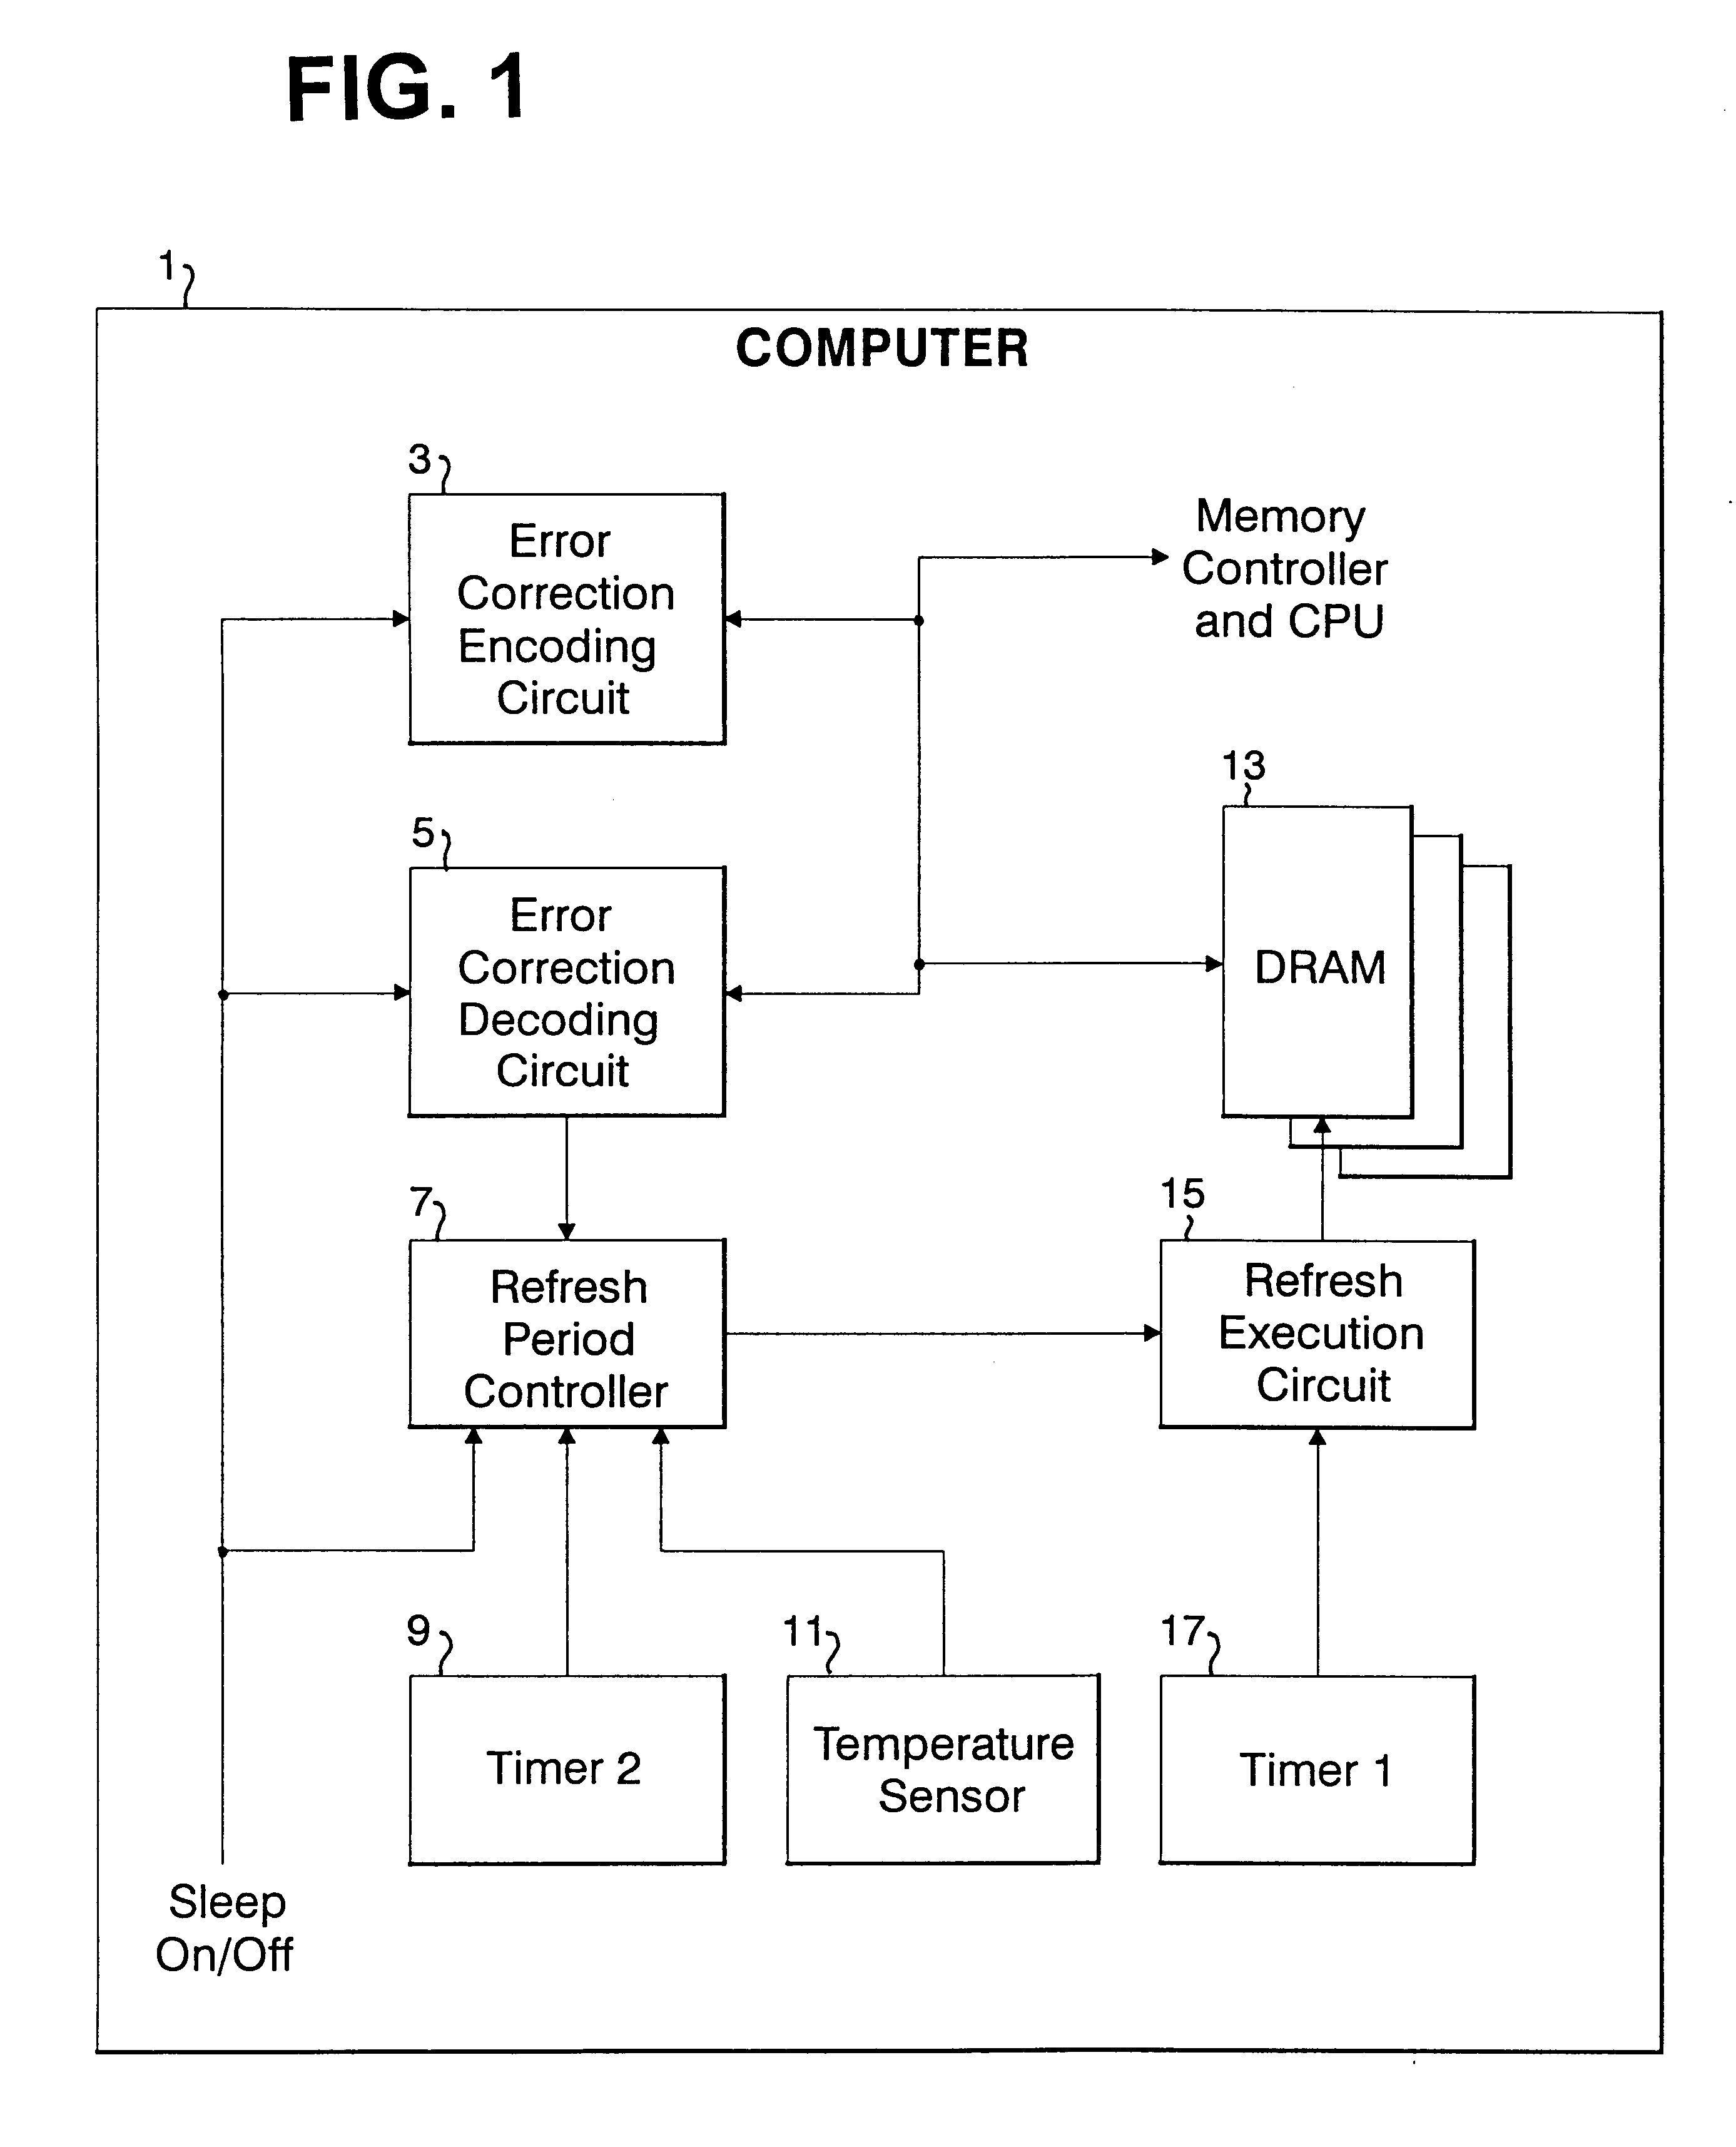 Refresh period control apparatus and method, and computer